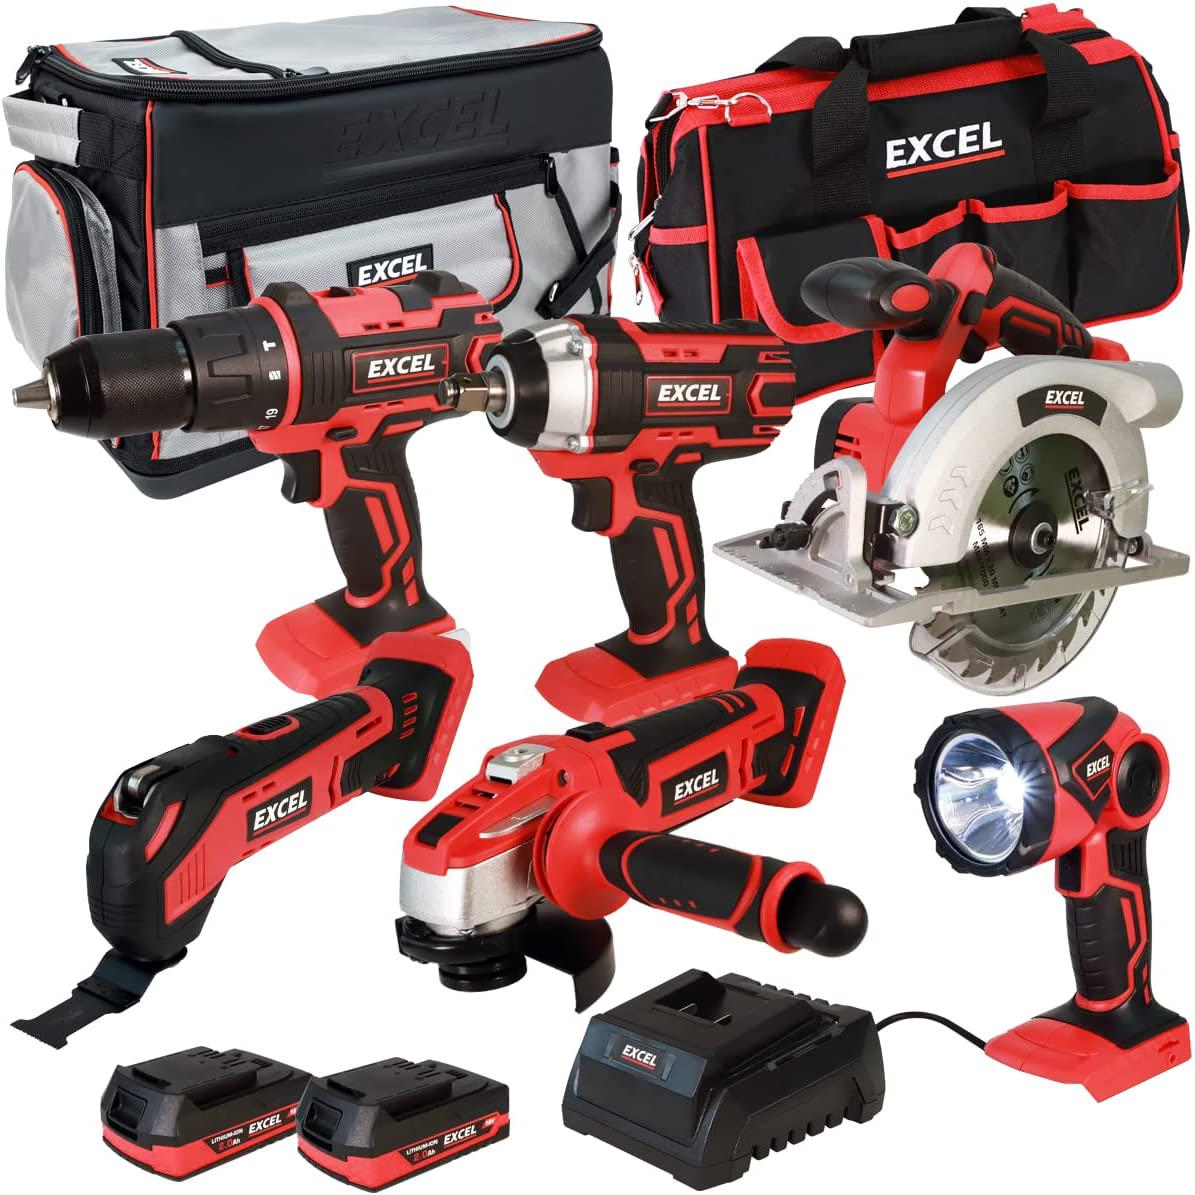 Excel, Excel 18V 6 Piece Power Tool Kit with 2 x 2.0Ah Batteries and Charger EXL10197 - Combo Kit - Monster Power Tool Kit - 18V Cordless Power Tool Kits - Mega Power Tool - 6 Piece Tool Kit